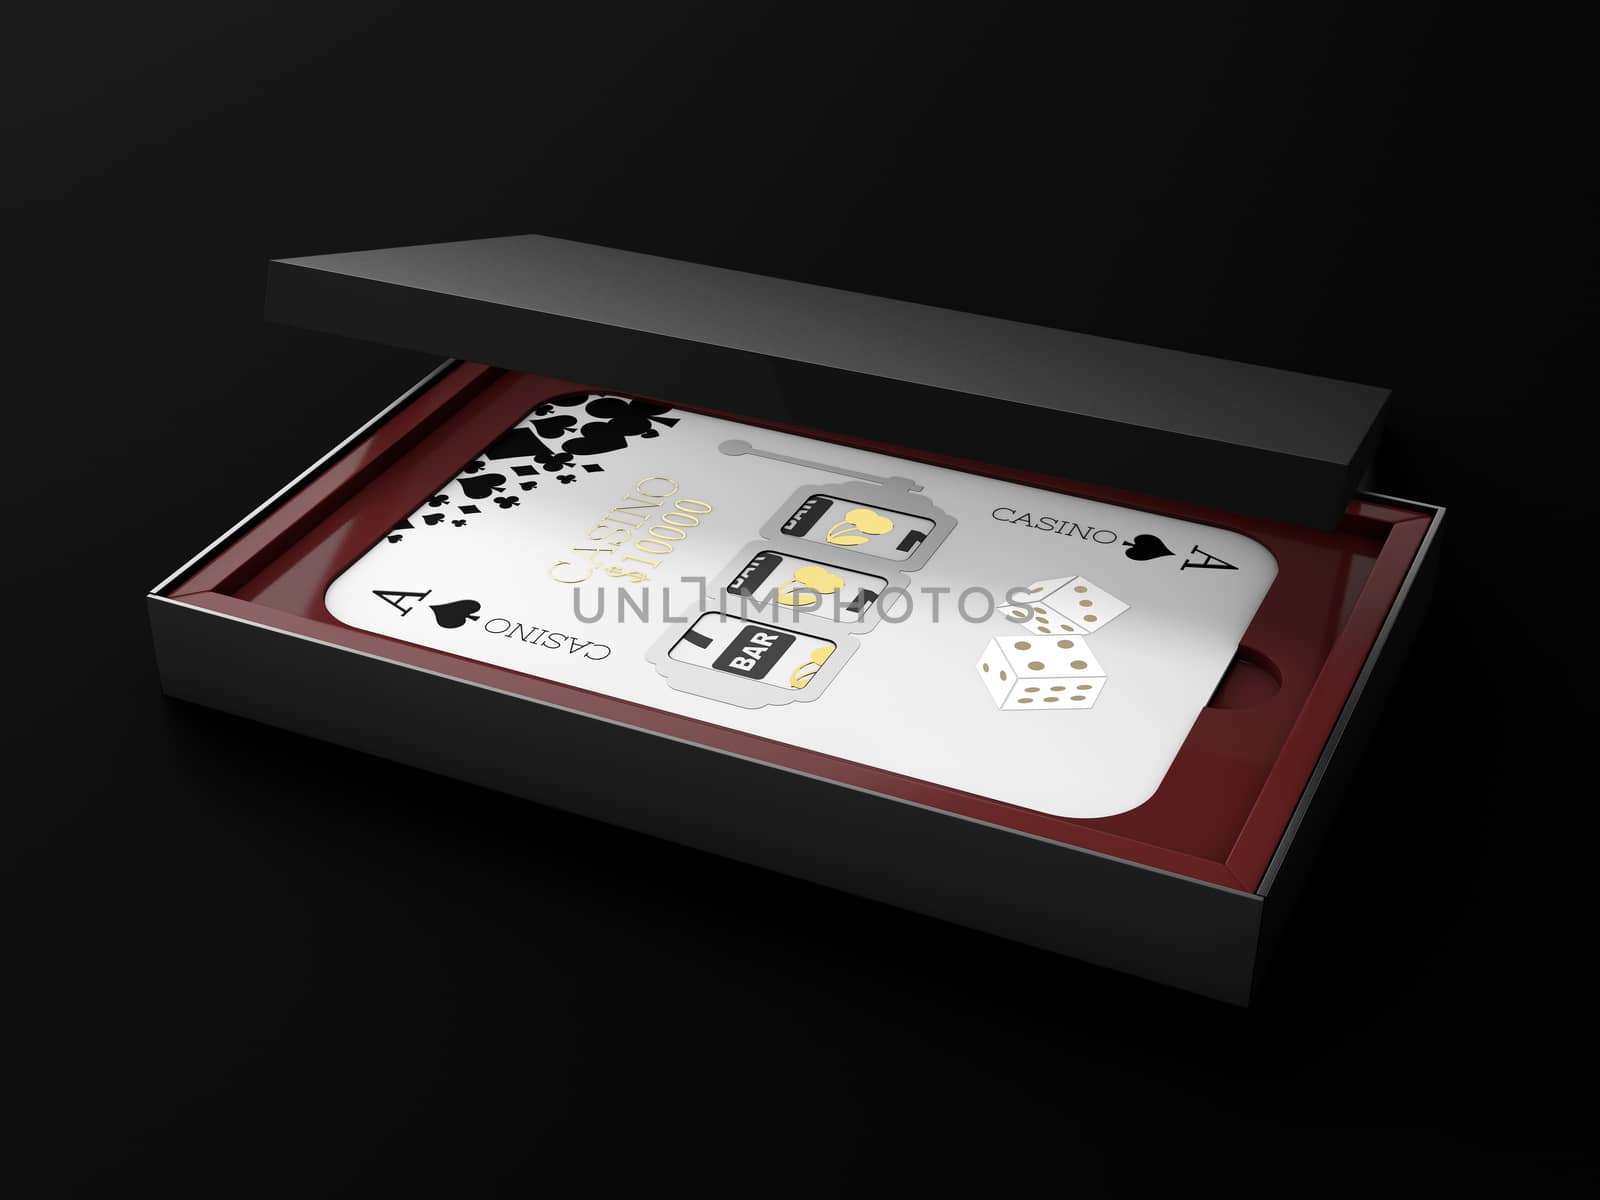 Ace of spades playing card in the box 3d illustration by tussik